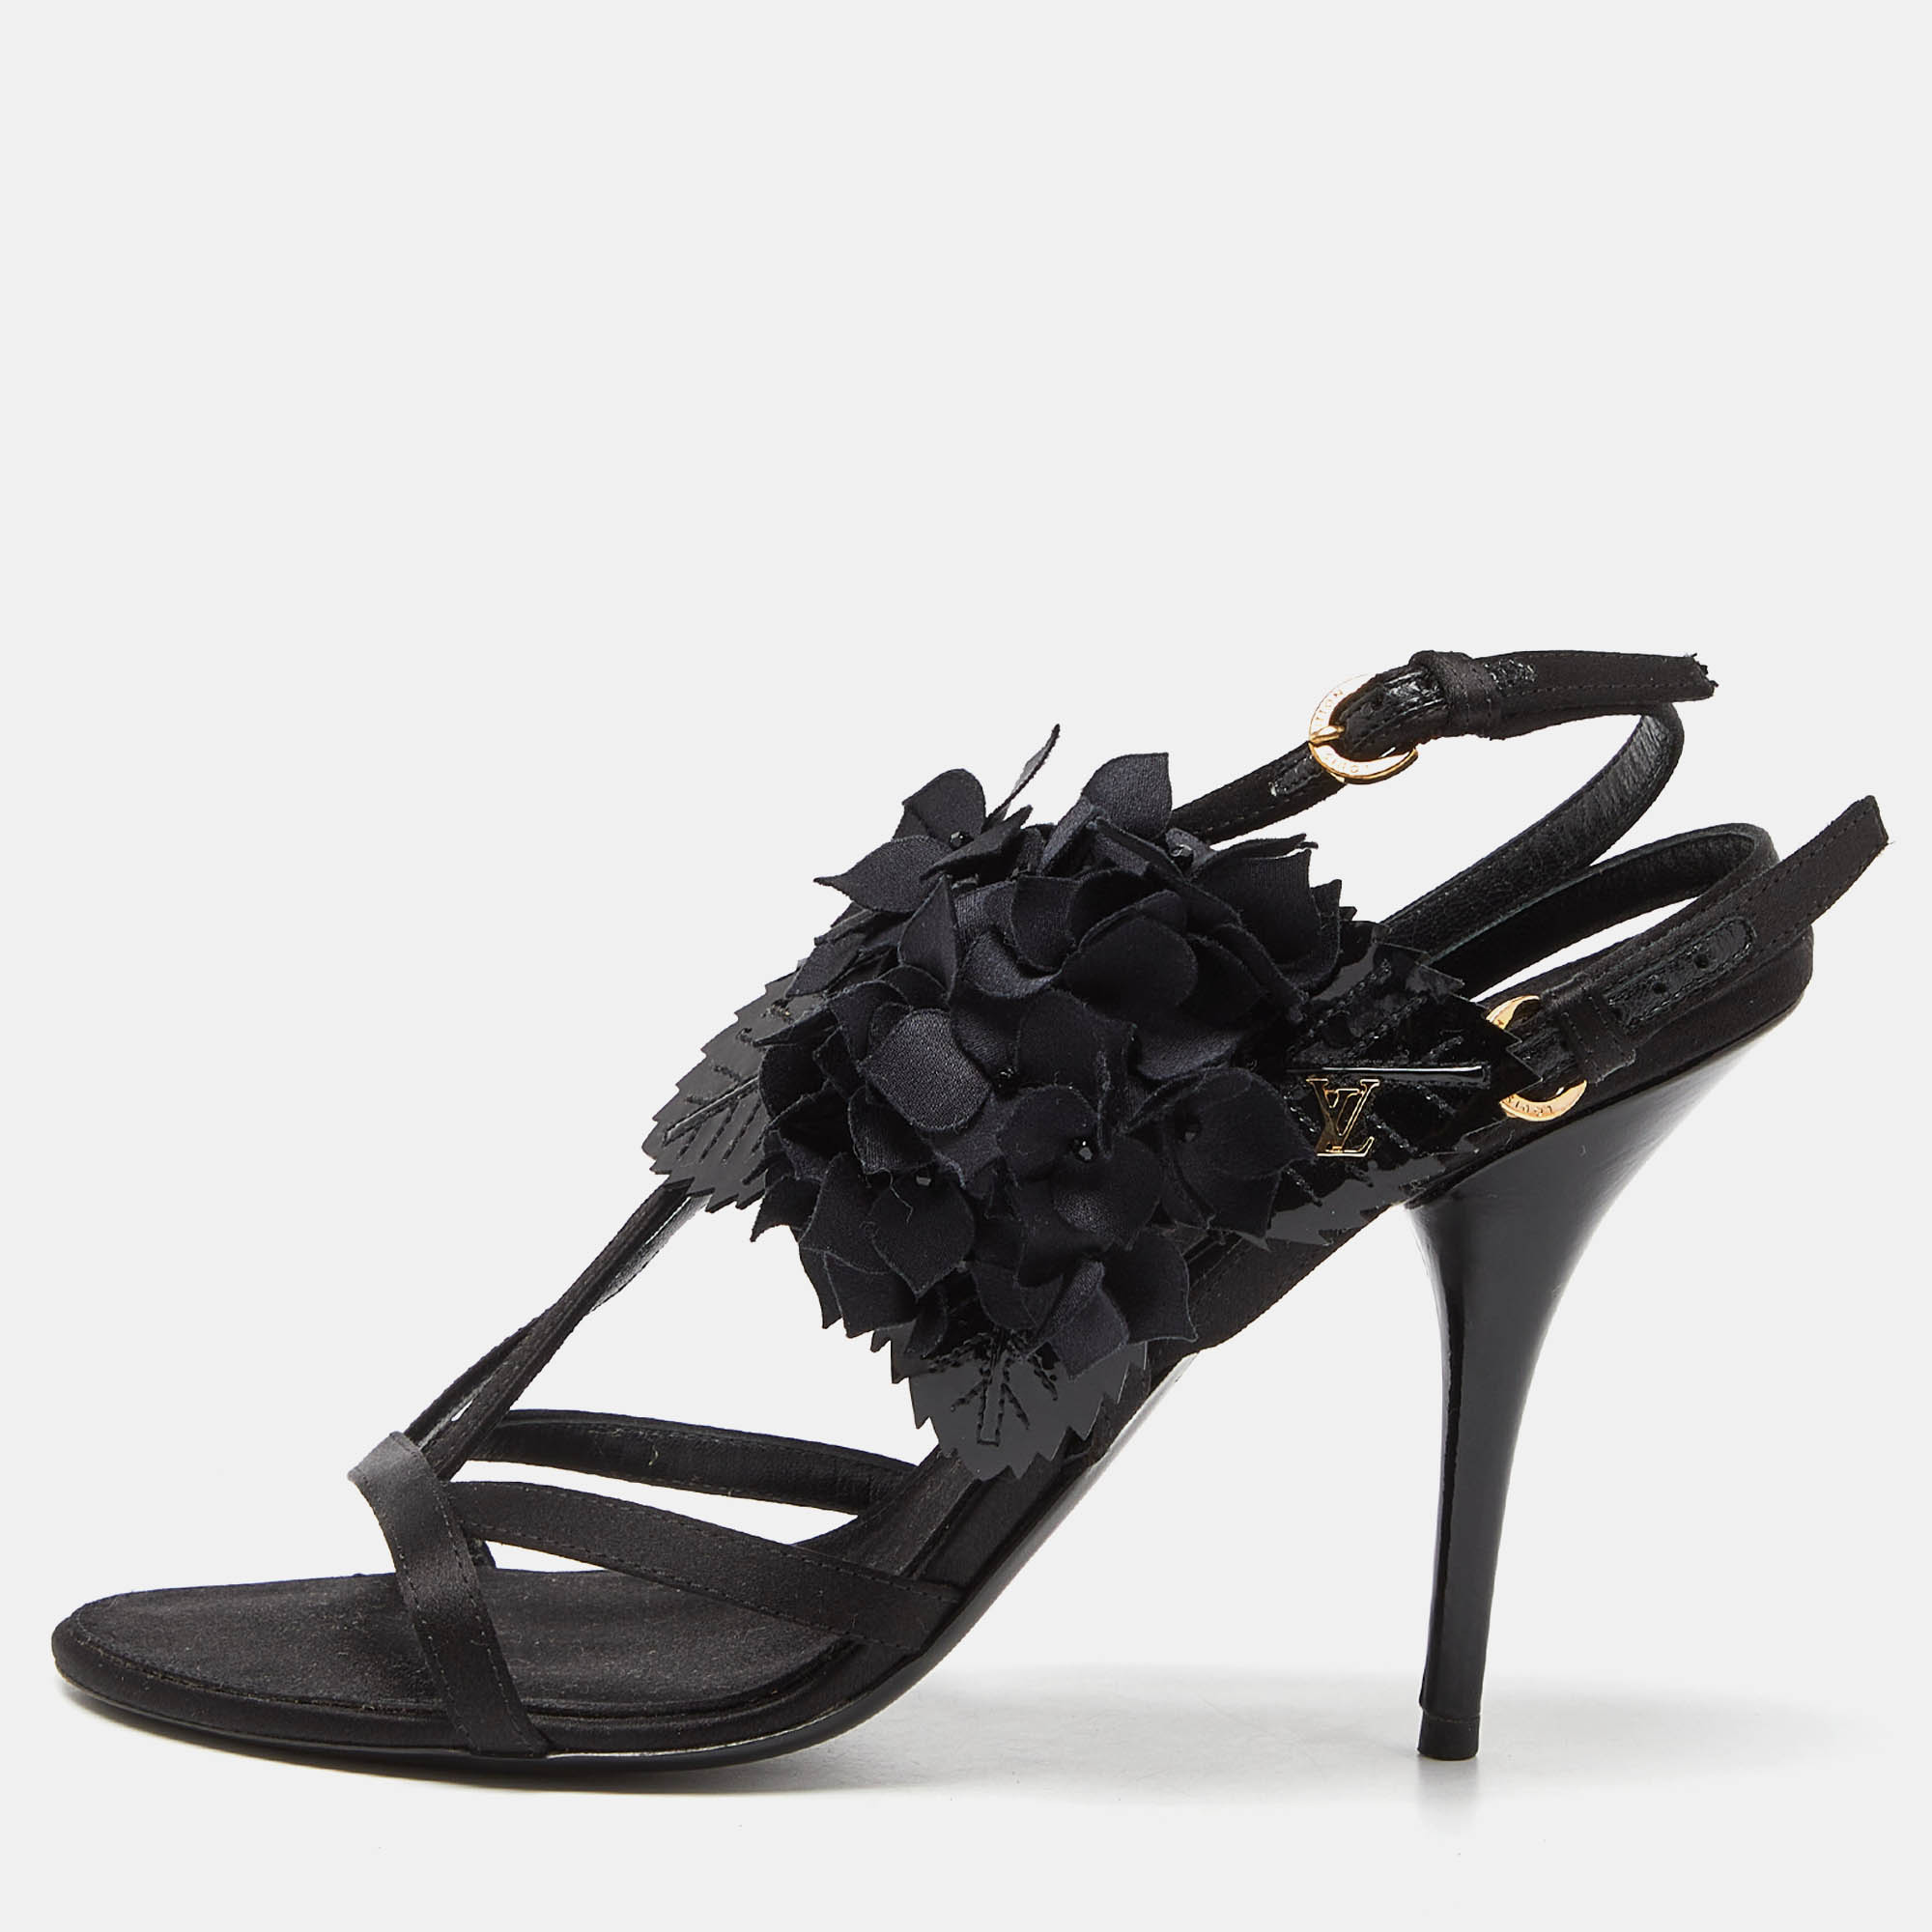 Louis vuitton black satin and patent leather flower embellished ankle strap sandals size 38.5